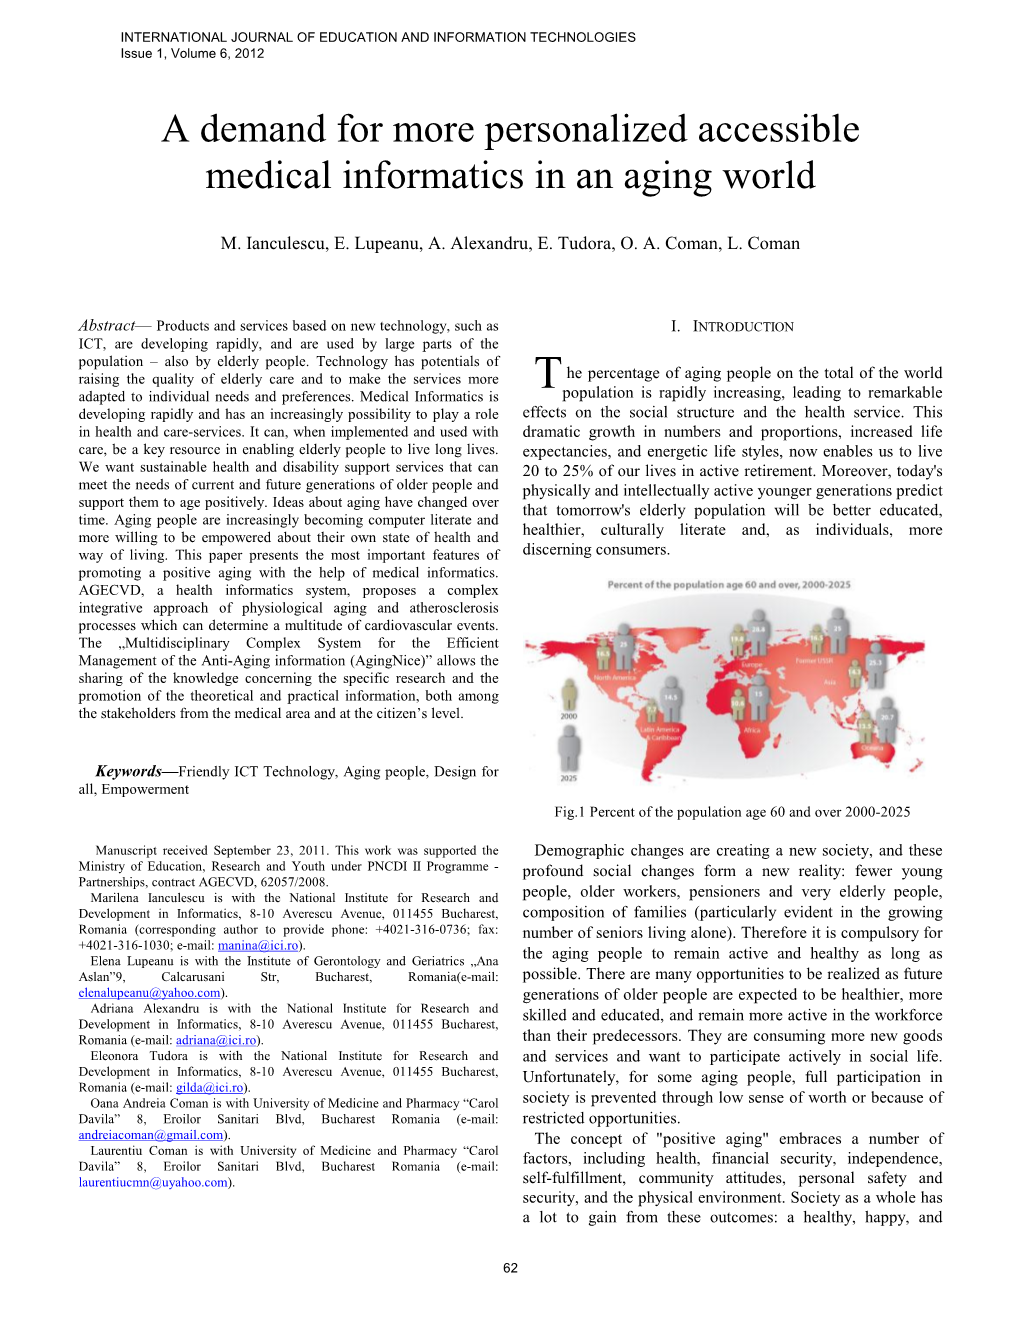 A Demand for More Personalized Accessible Medical Informatics in an Aging World